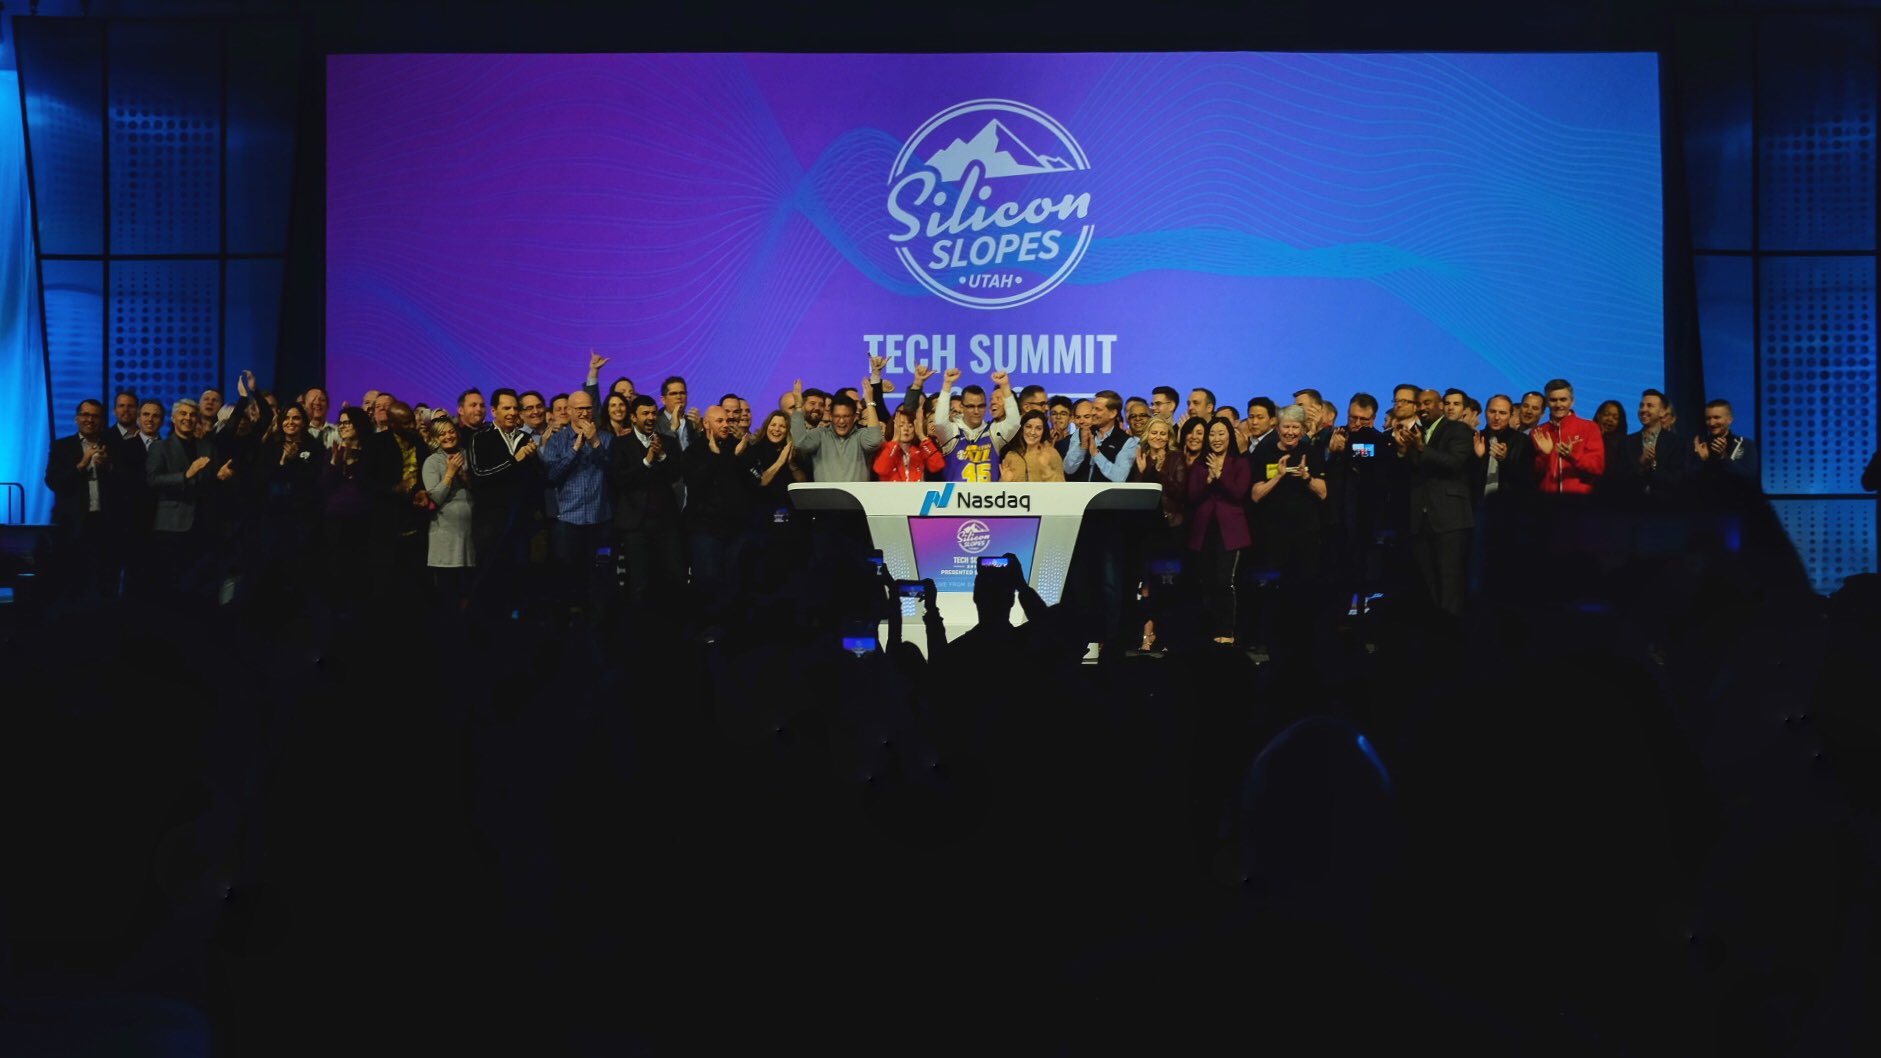 tech companies celebrate on stage at Silicon slopes tech summit